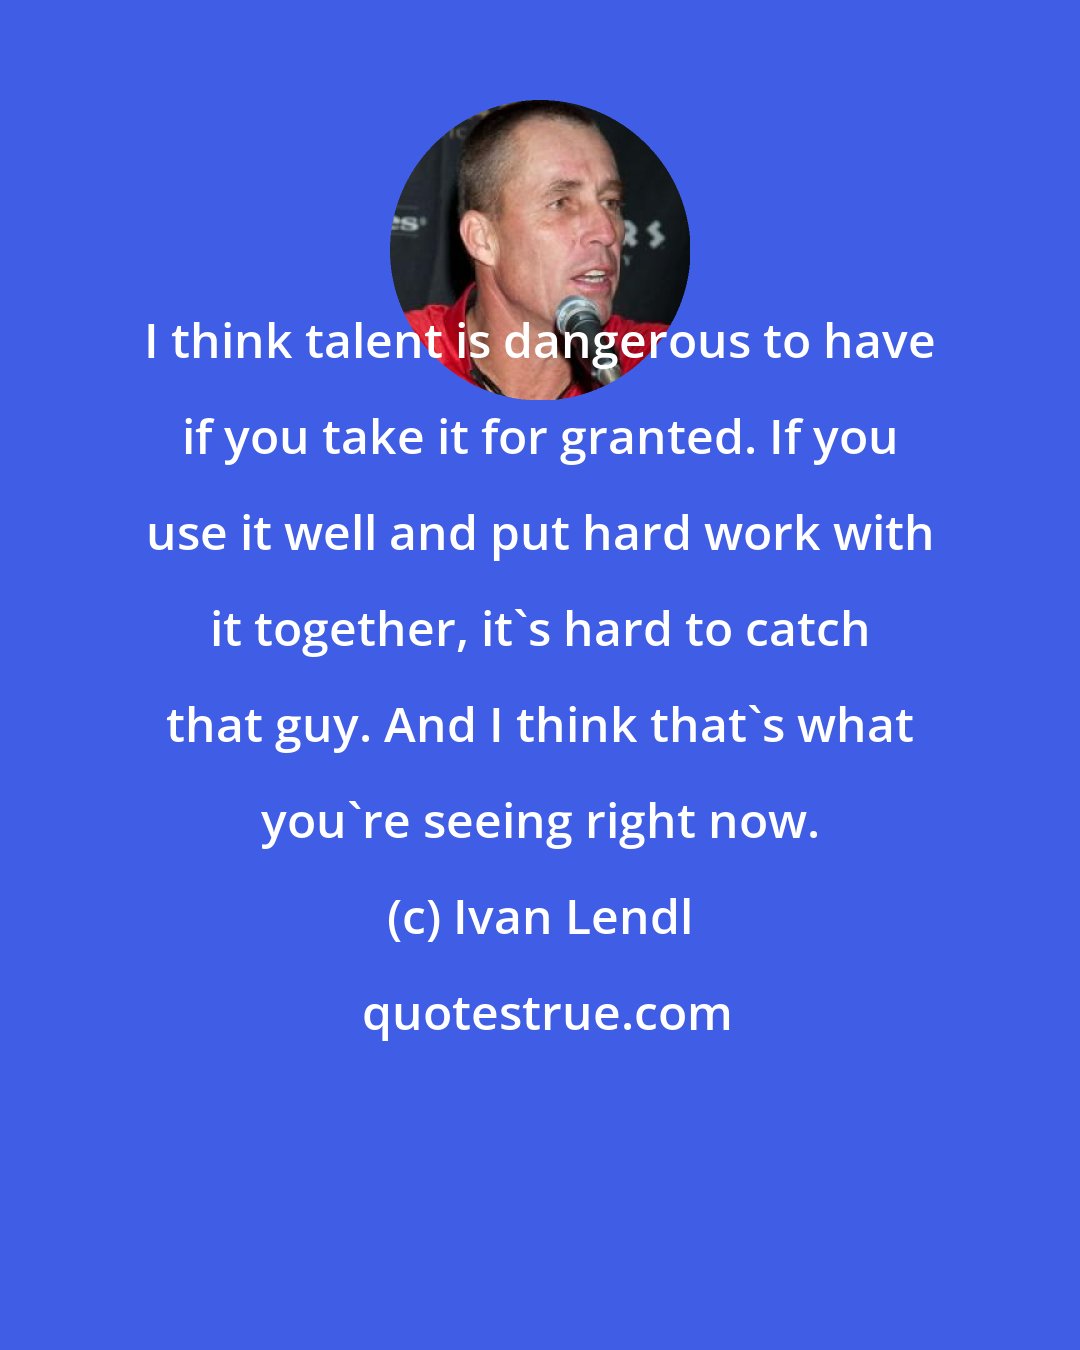 Ivan Lendl: I think talent is dangerous to have if you take it for granted. If you use it well and put hard work with it together, it's hard to catch that guy. And I think that's what you're seeing right now.